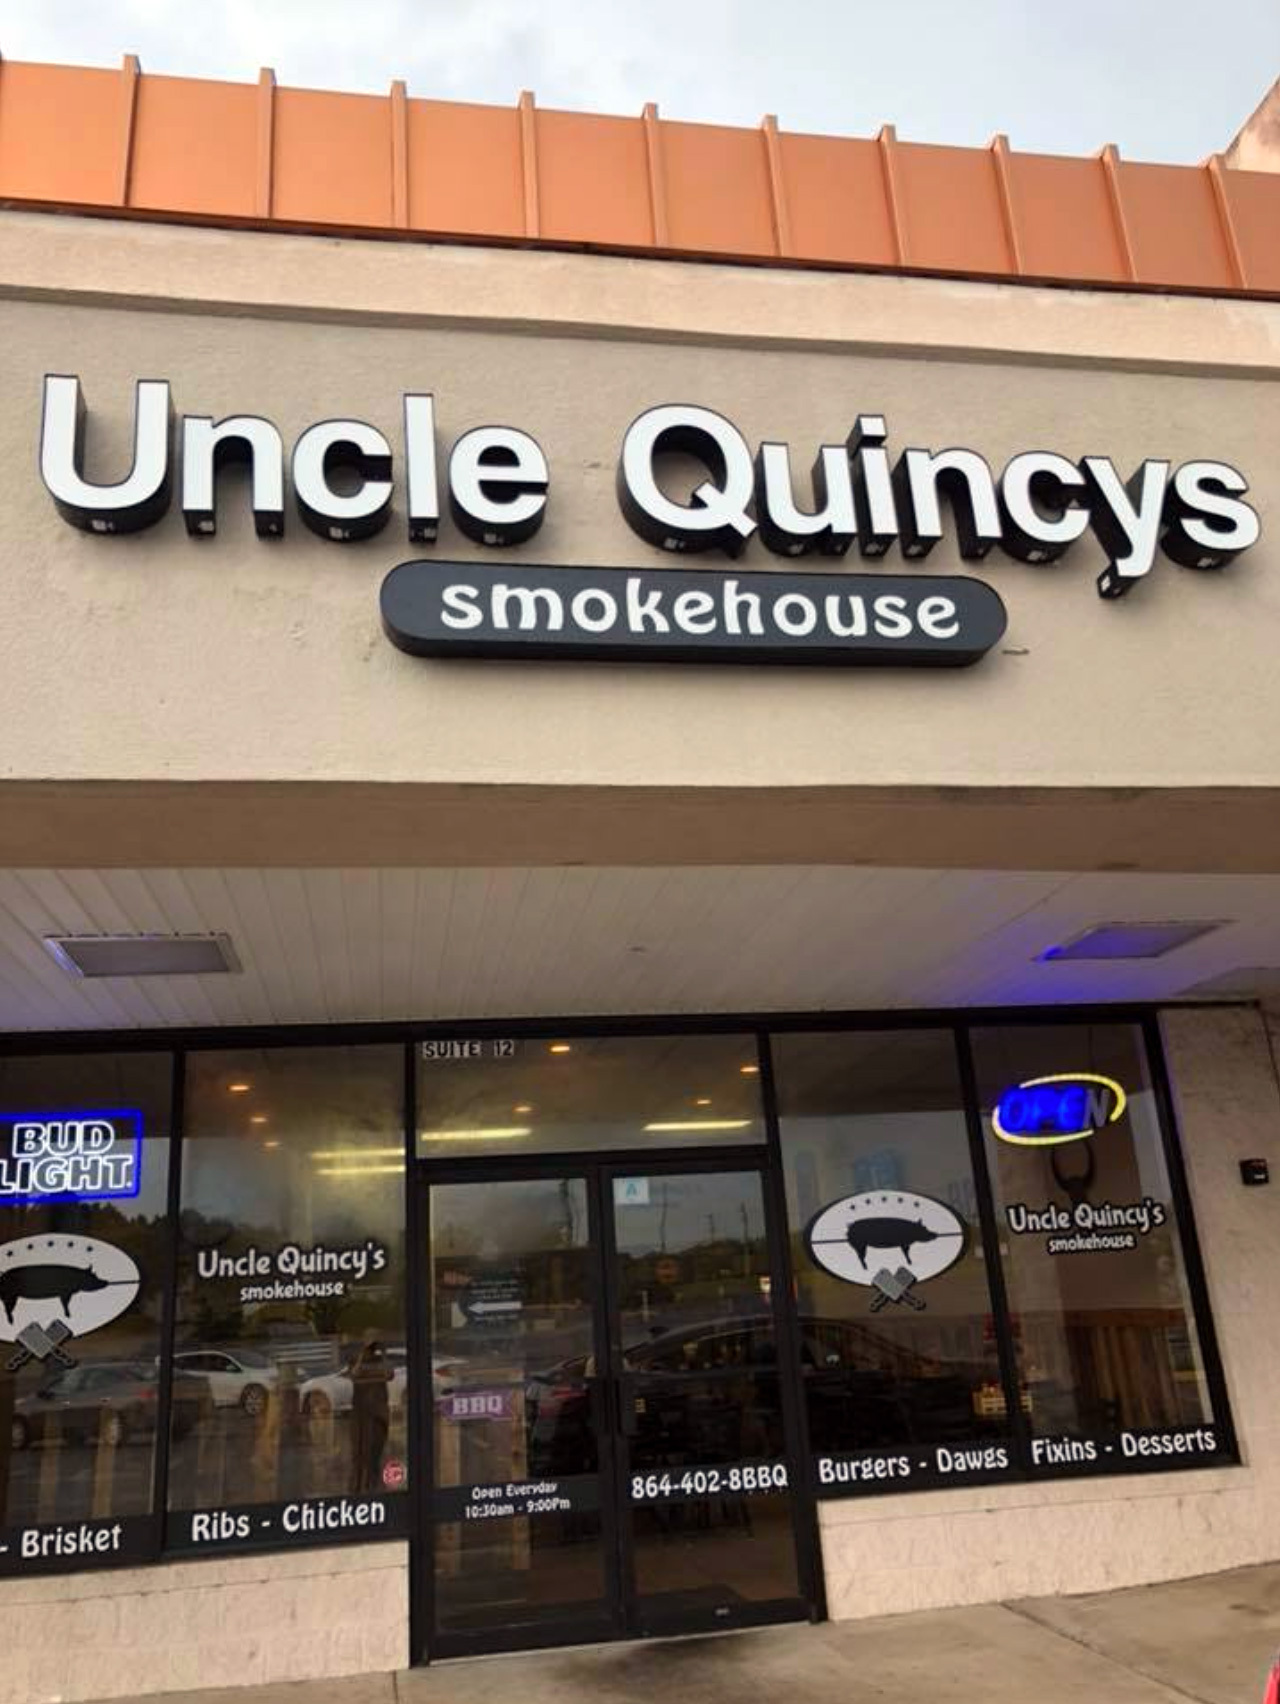 Uncle Quincy's Smokehouse in Union